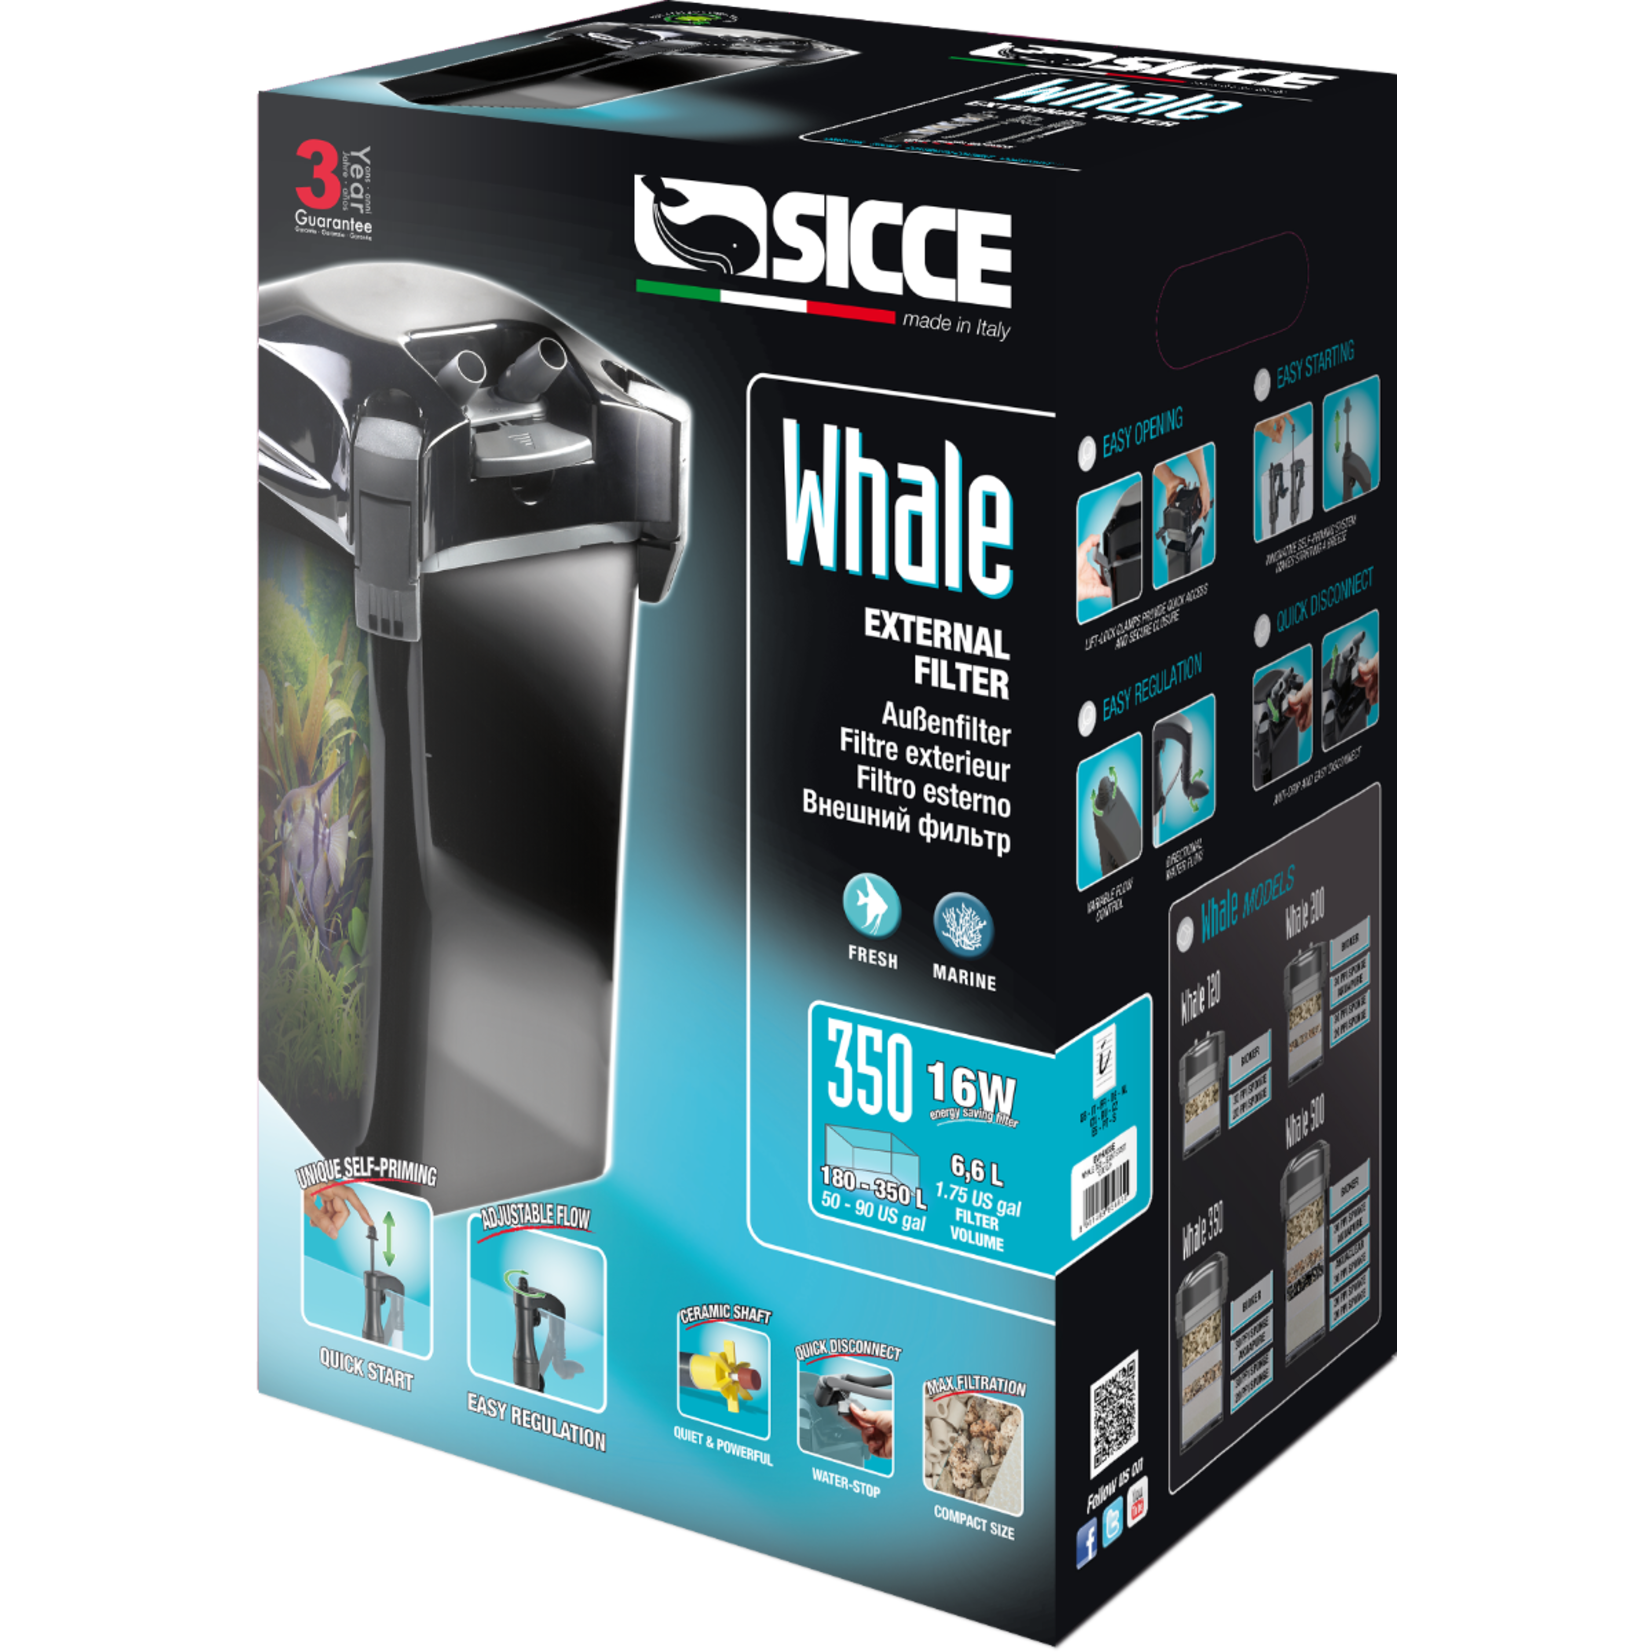 Sicce Whale 350 Canister Filter